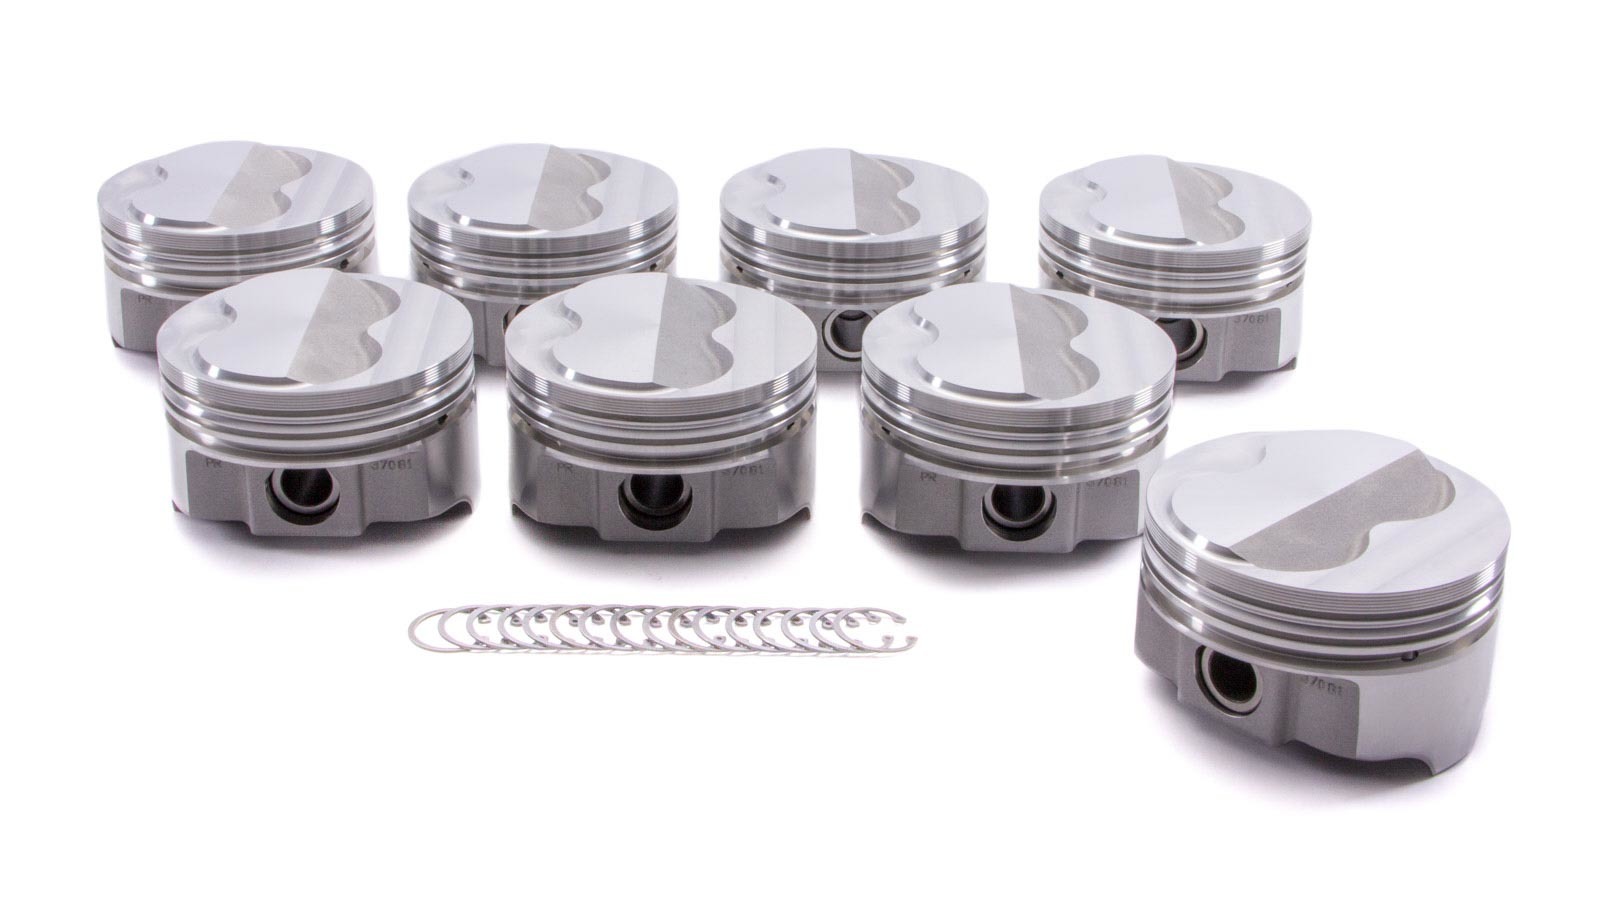 Icon Pistons IC9933.030 Piston, FHR Forged, Forged, 4.030 in Bore, 5/64 x 5/64 x 3/16 in Ring Grooves, Plus 6.00 cc, Small Block Chevy, Set of 8